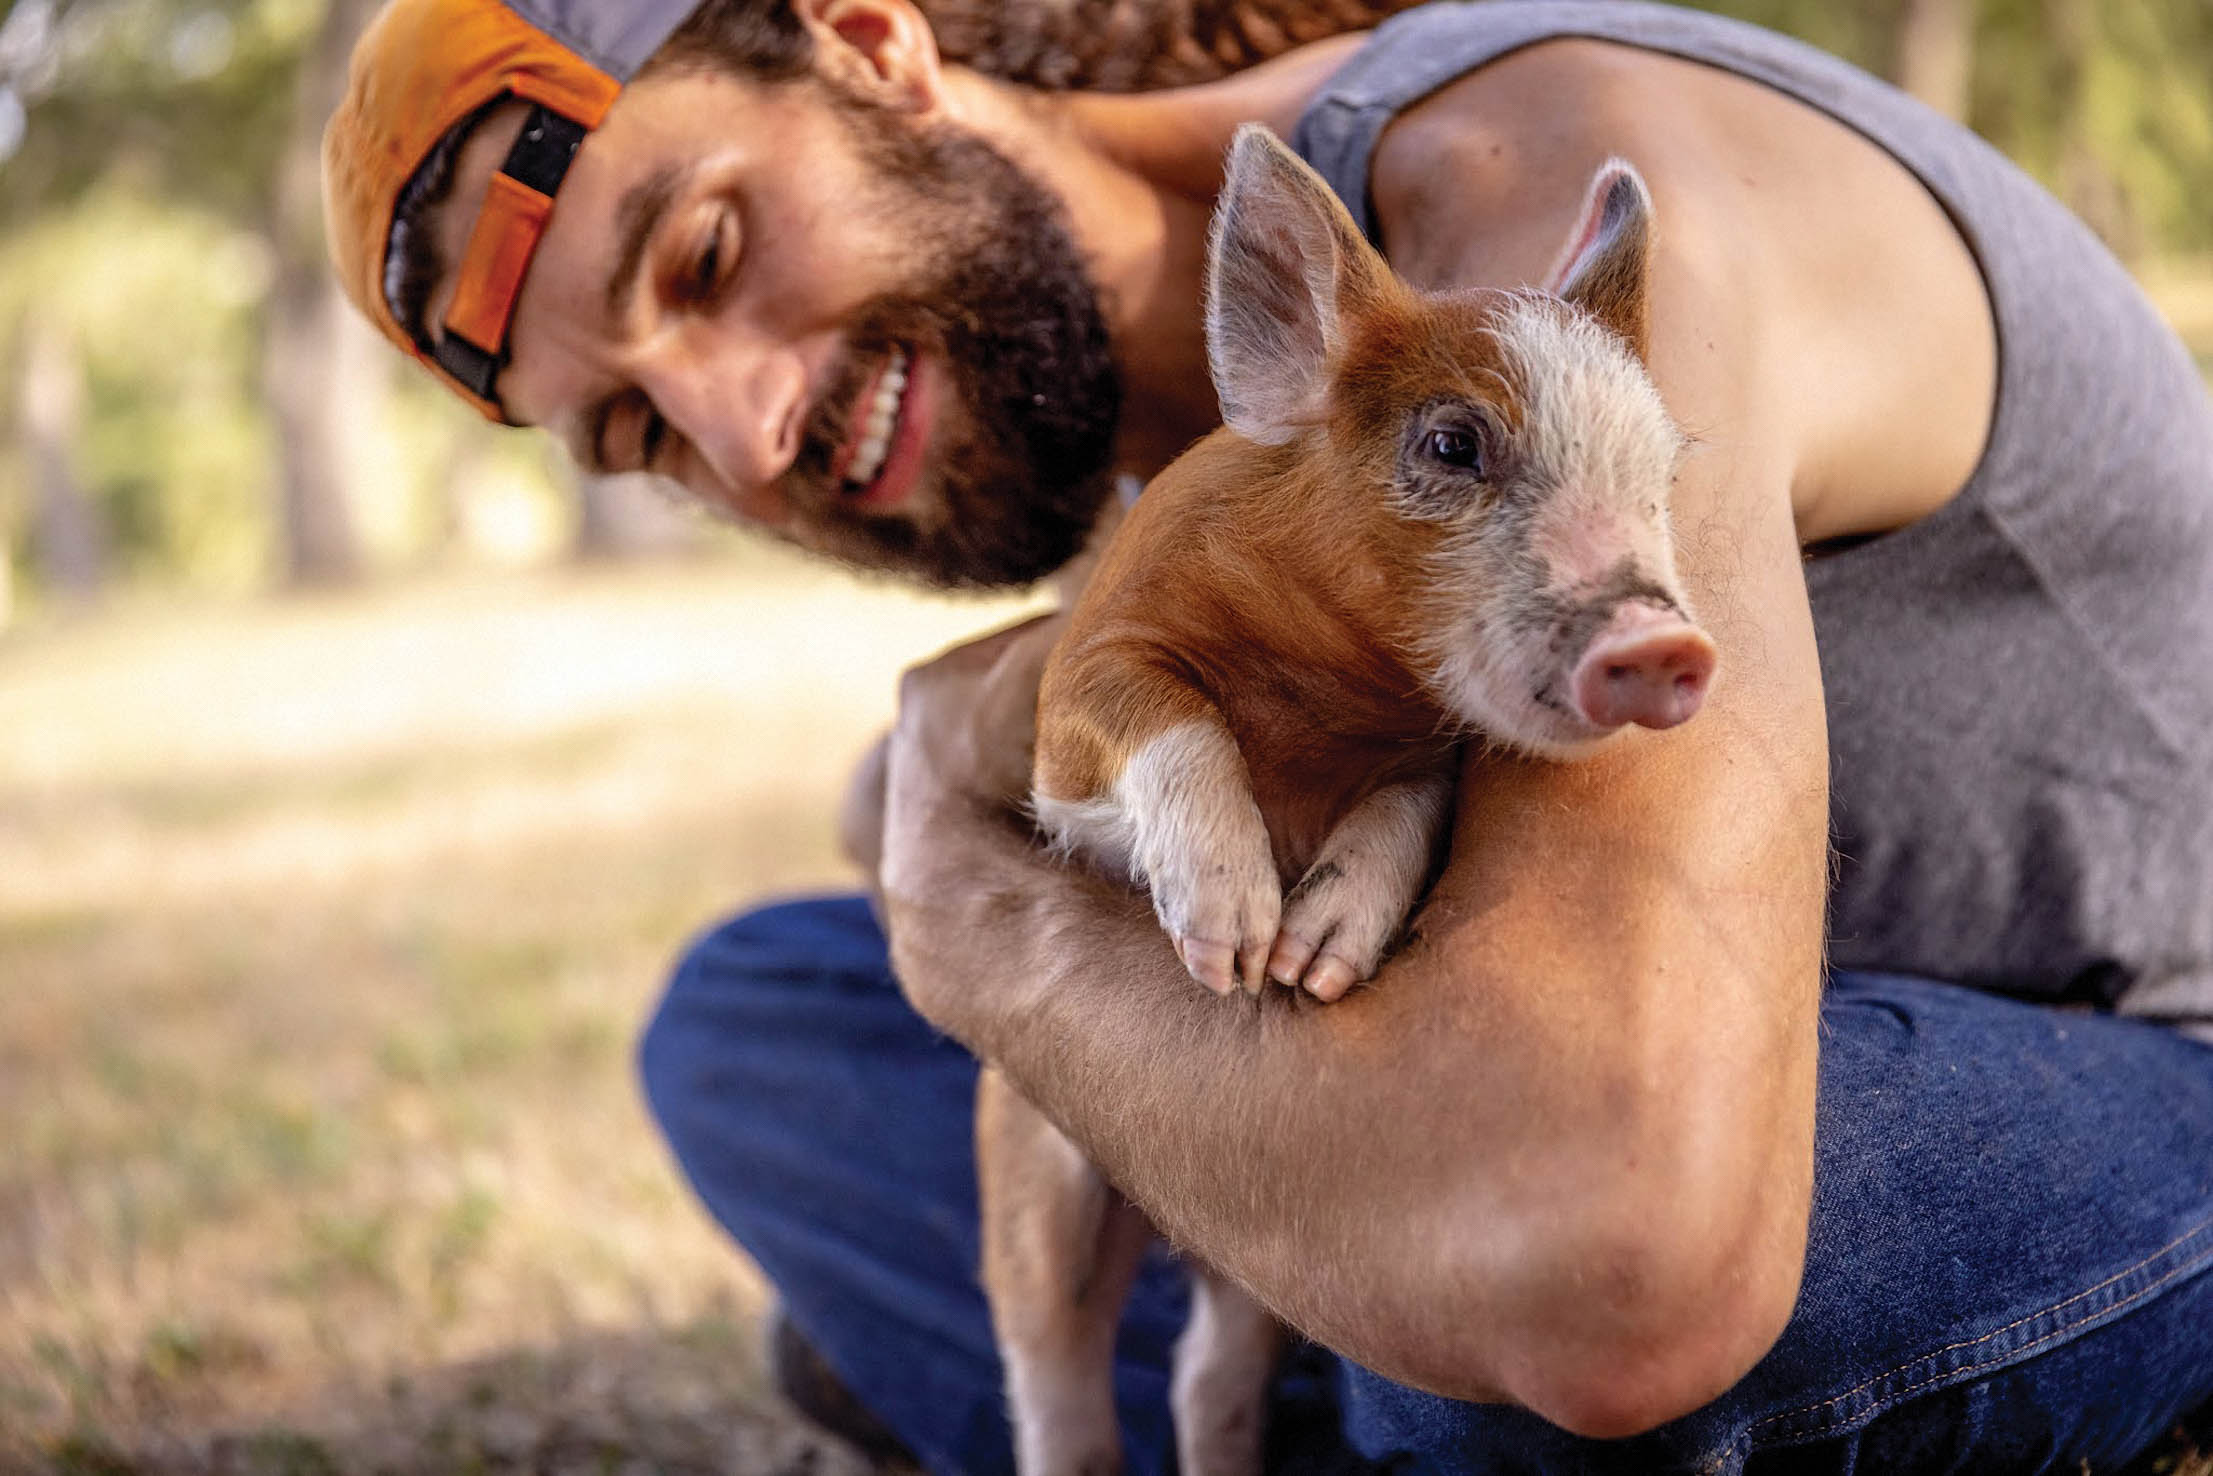 Man and pig.